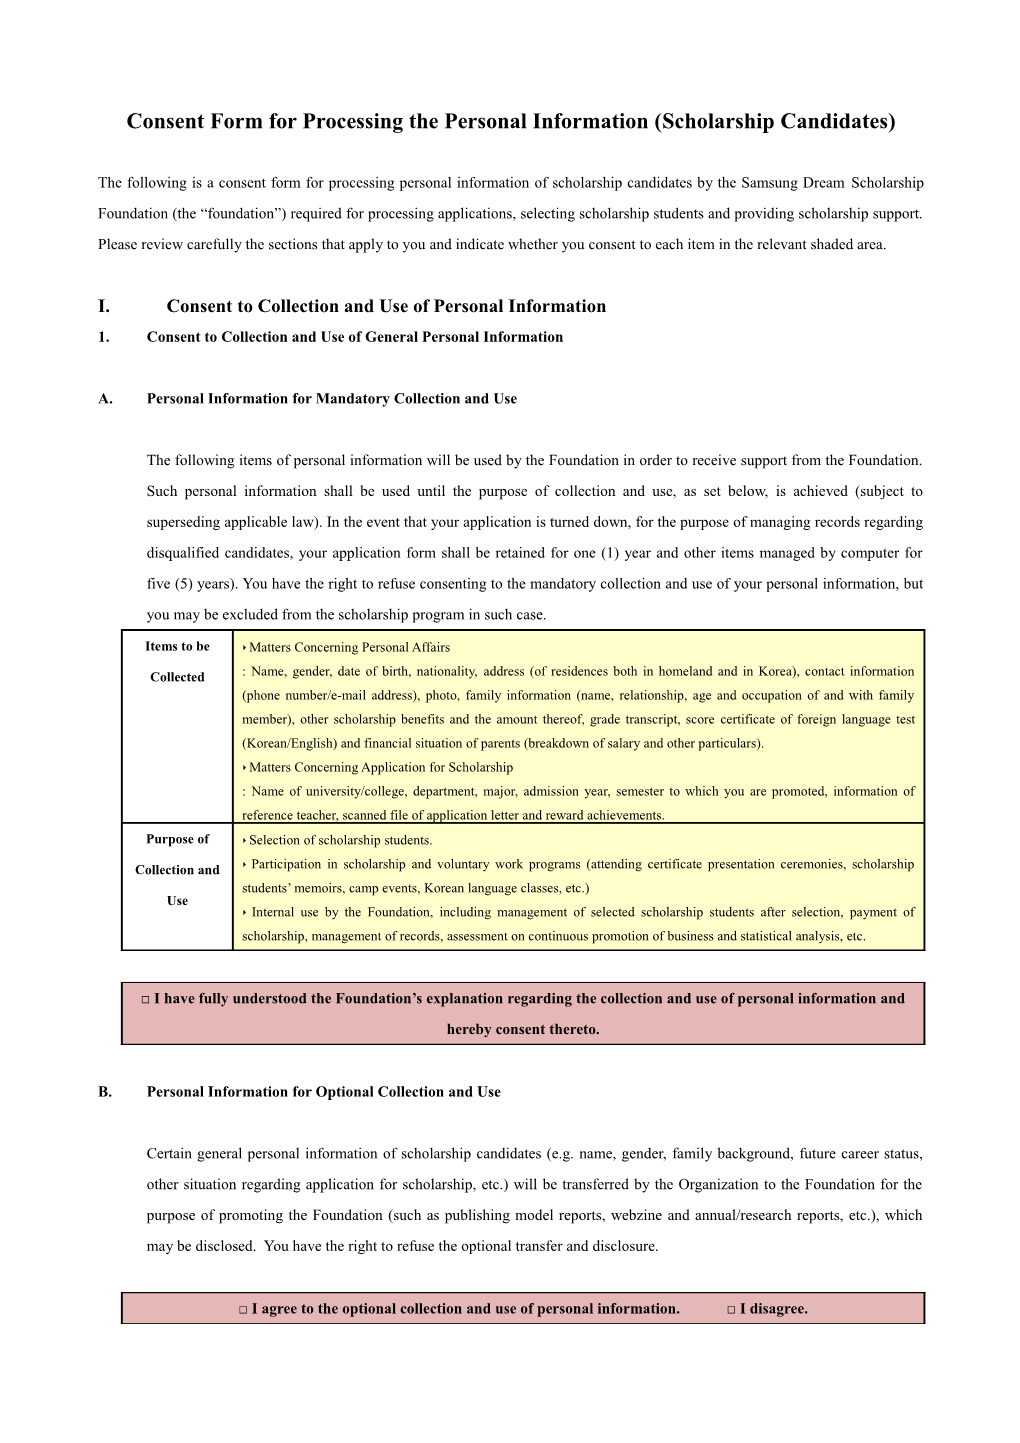 Consent Form for Processing the Personal Information (Scholarship Candidates)